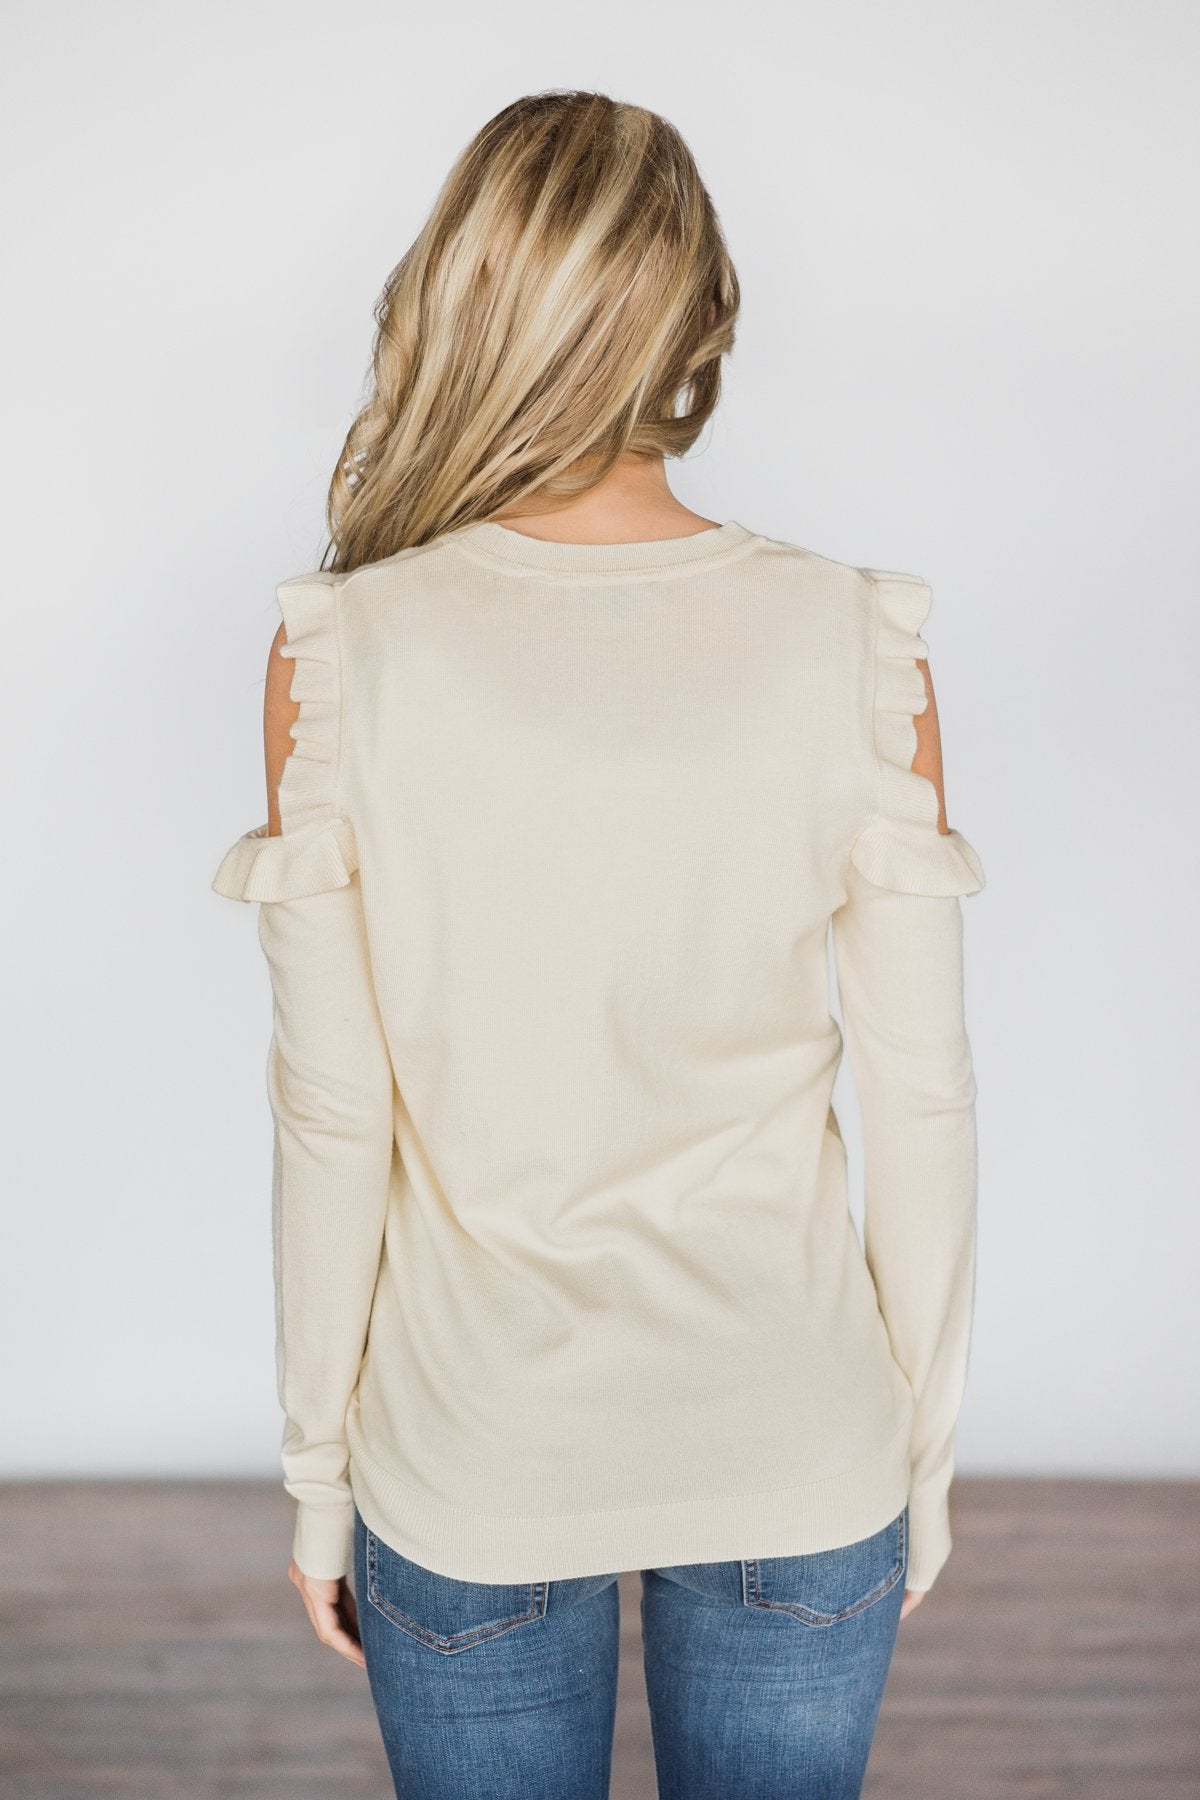 All Ruffled Up Cream Cold Shoulder Top